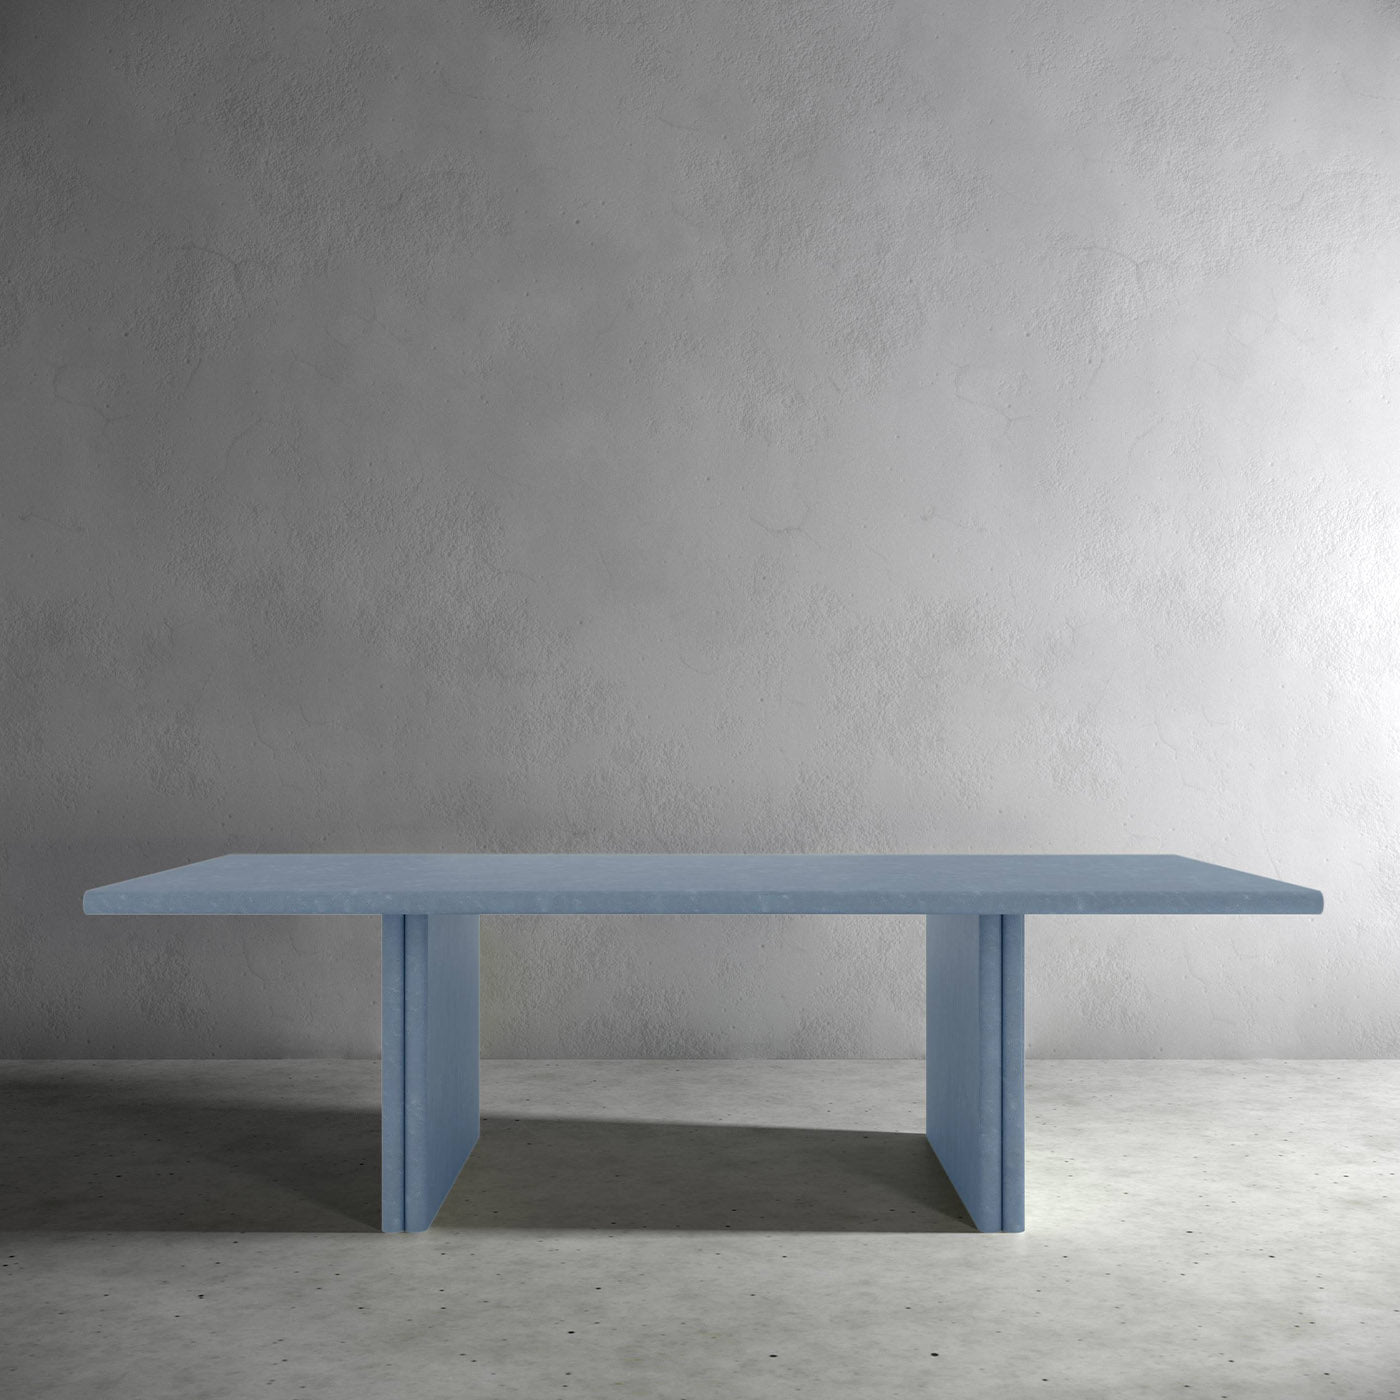 Jacques Powder Blue In Bird'S Eye Maple Dining Table - Alternative view 1